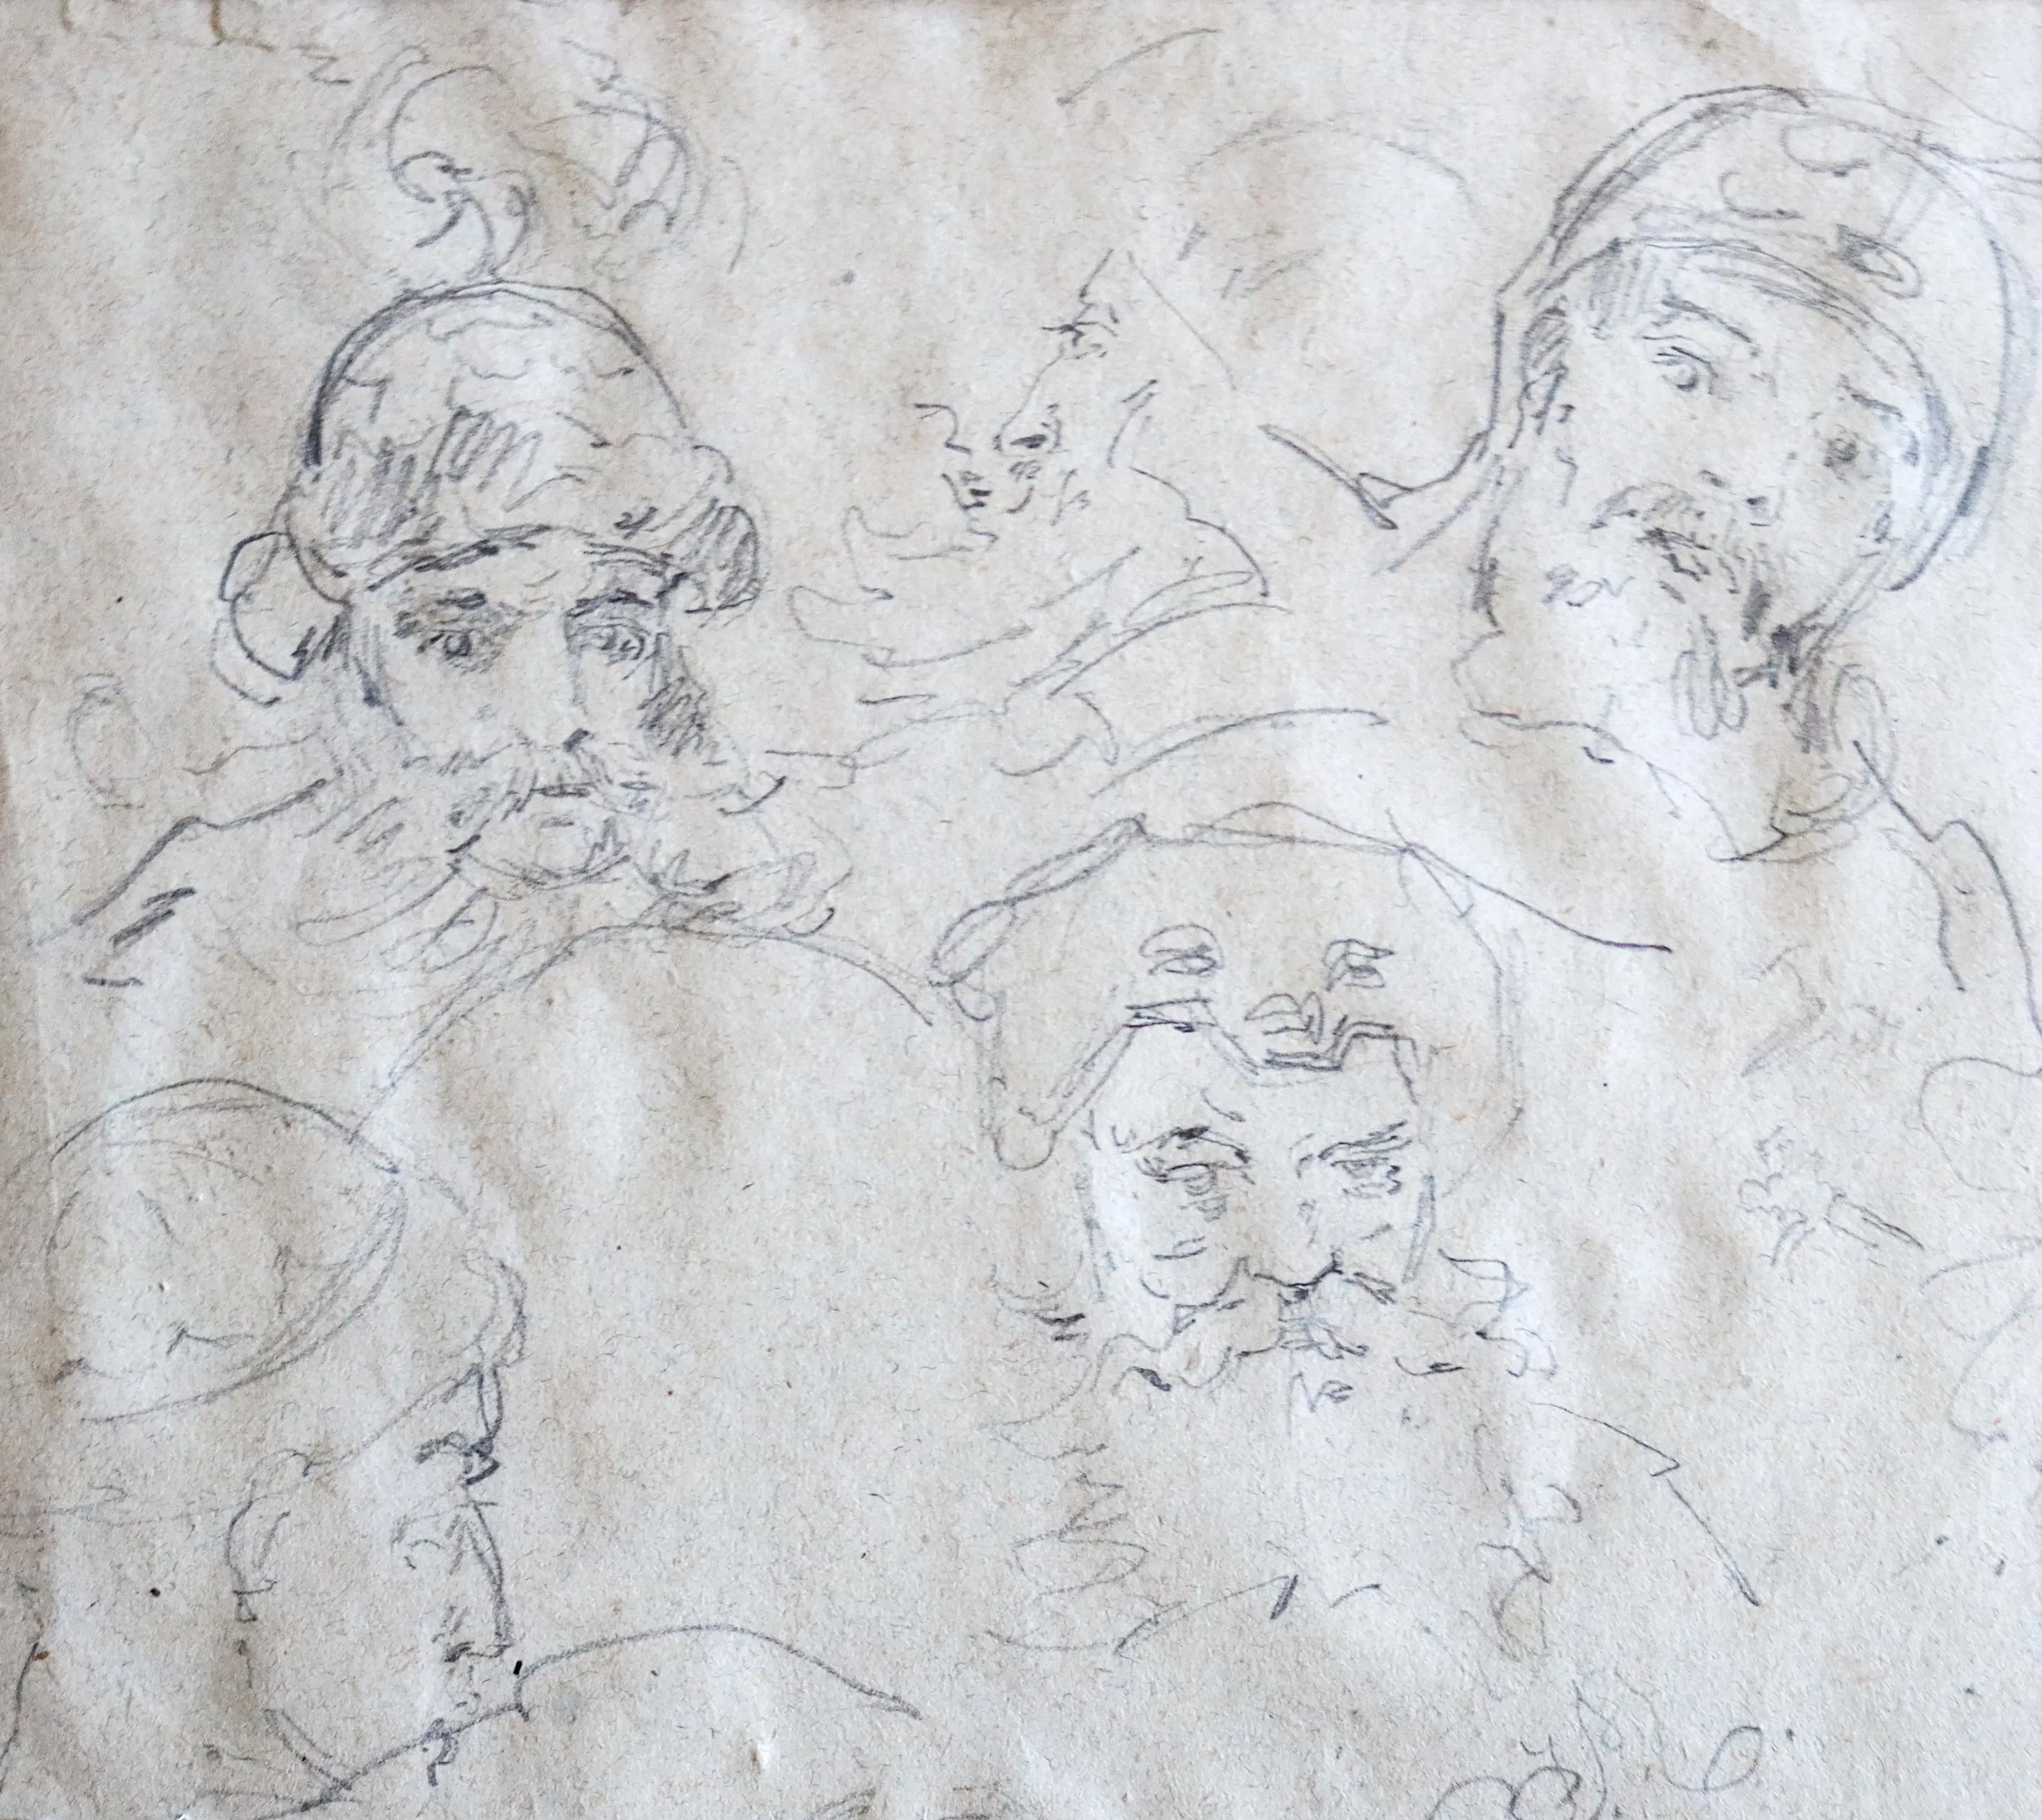 Sketch of the characters